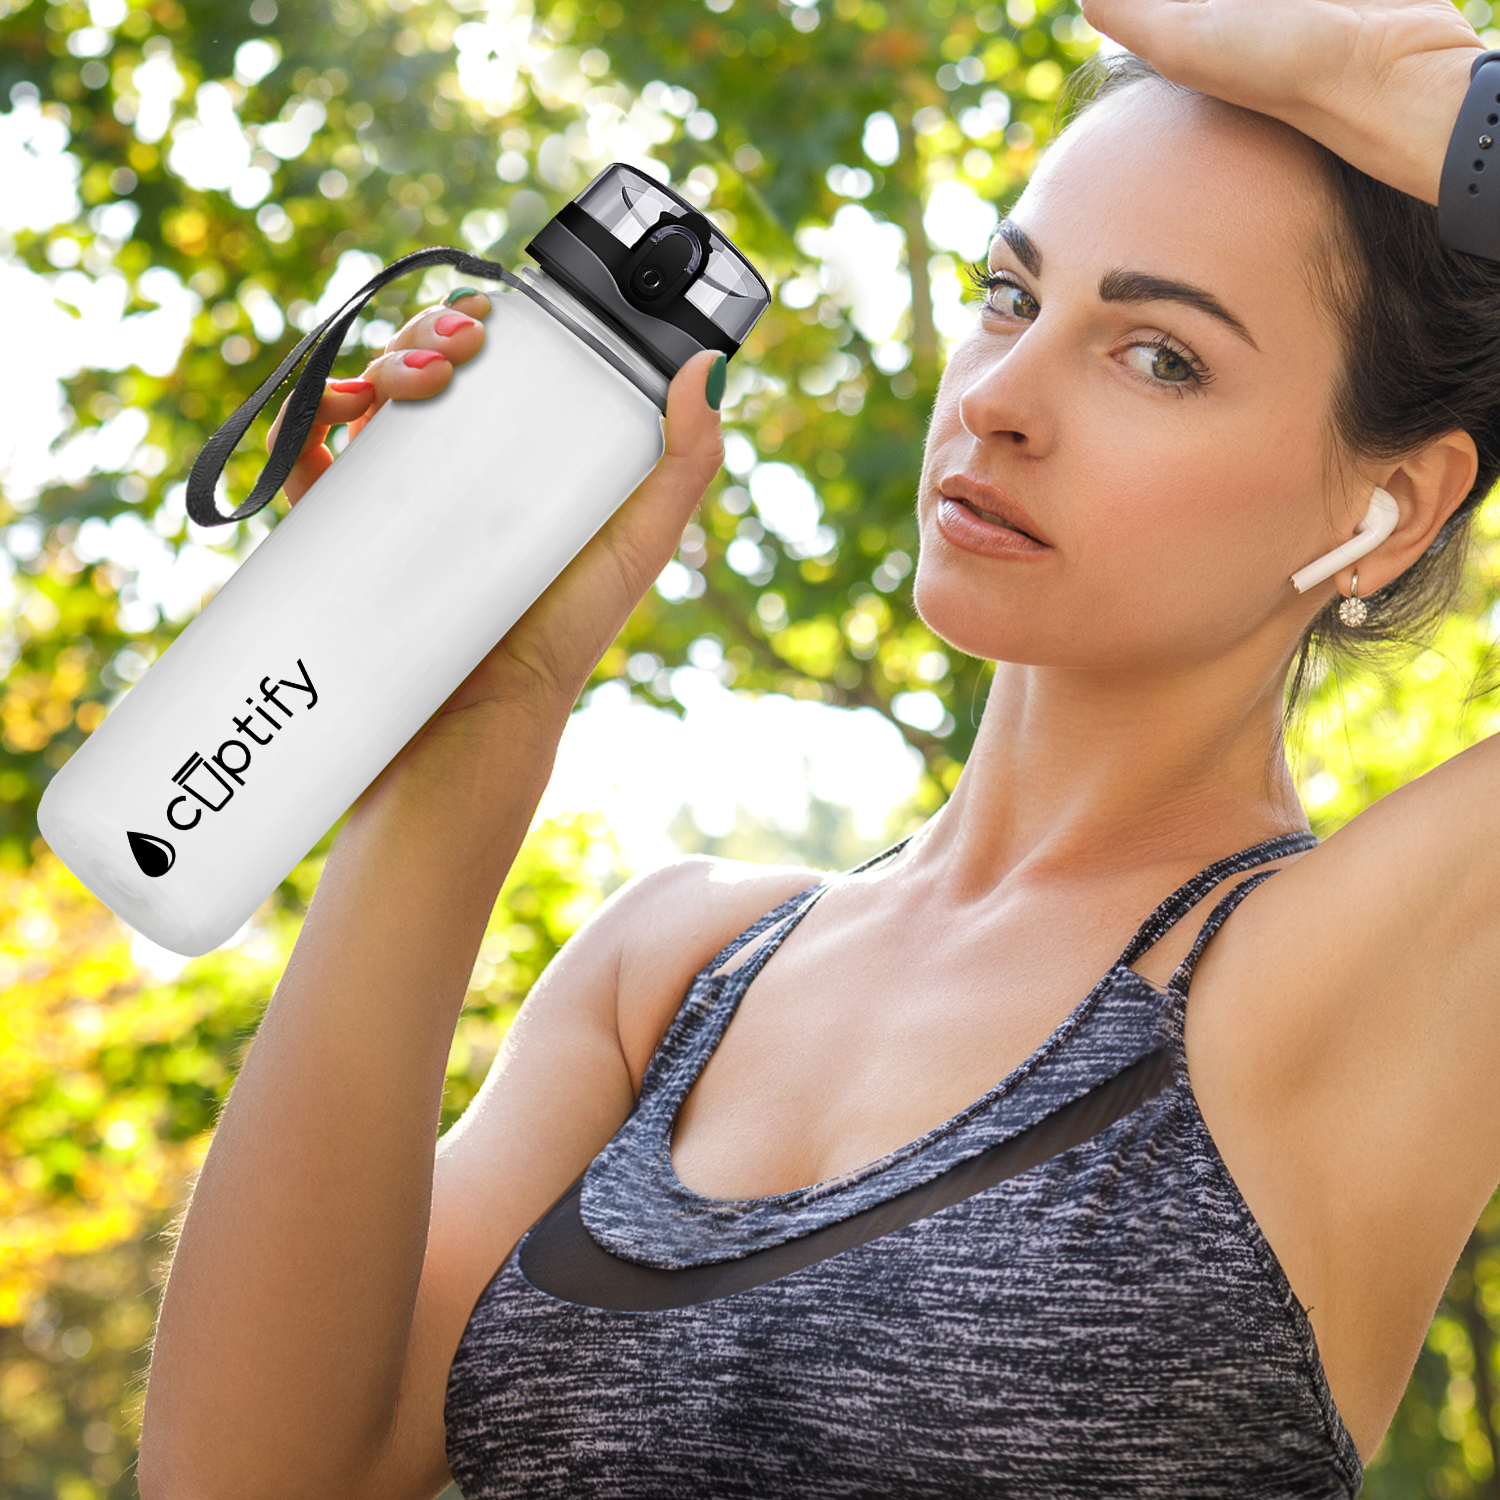 Cuptify Clear Frosted 32 oz Hydration Tracker Water Bottle